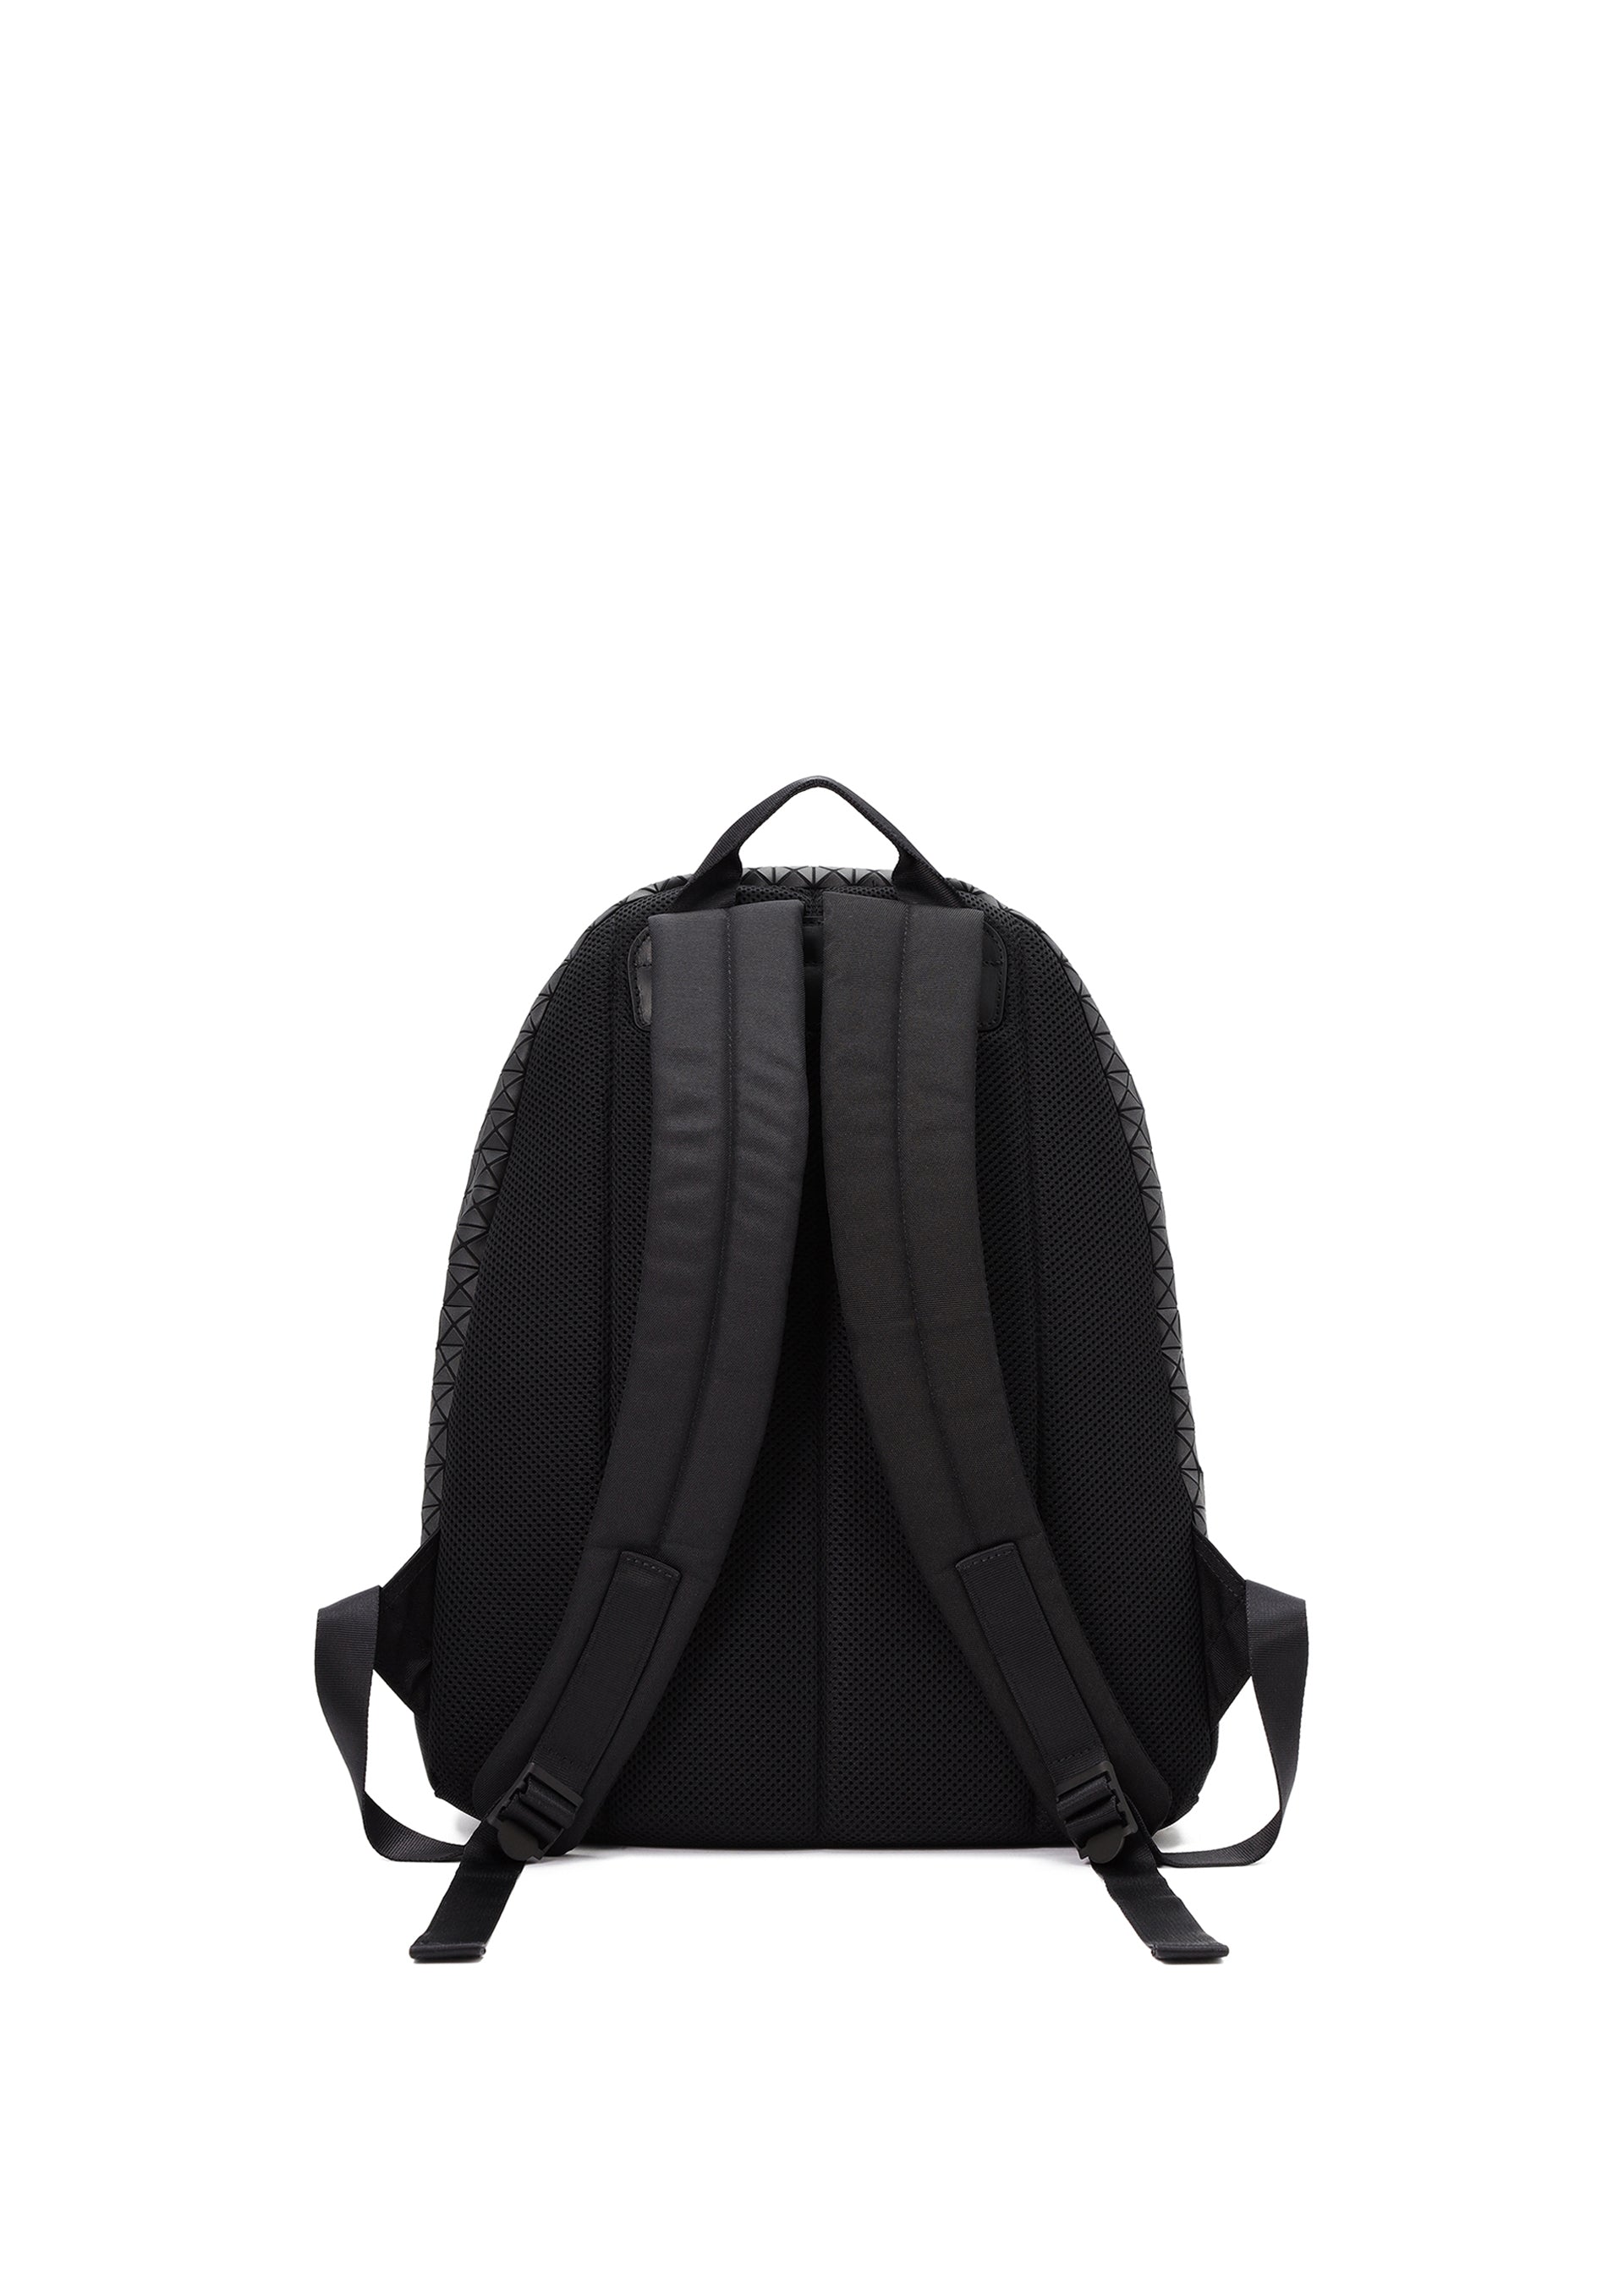 DAYPACK、バッグ&財布_バックパック、ディテール画像2